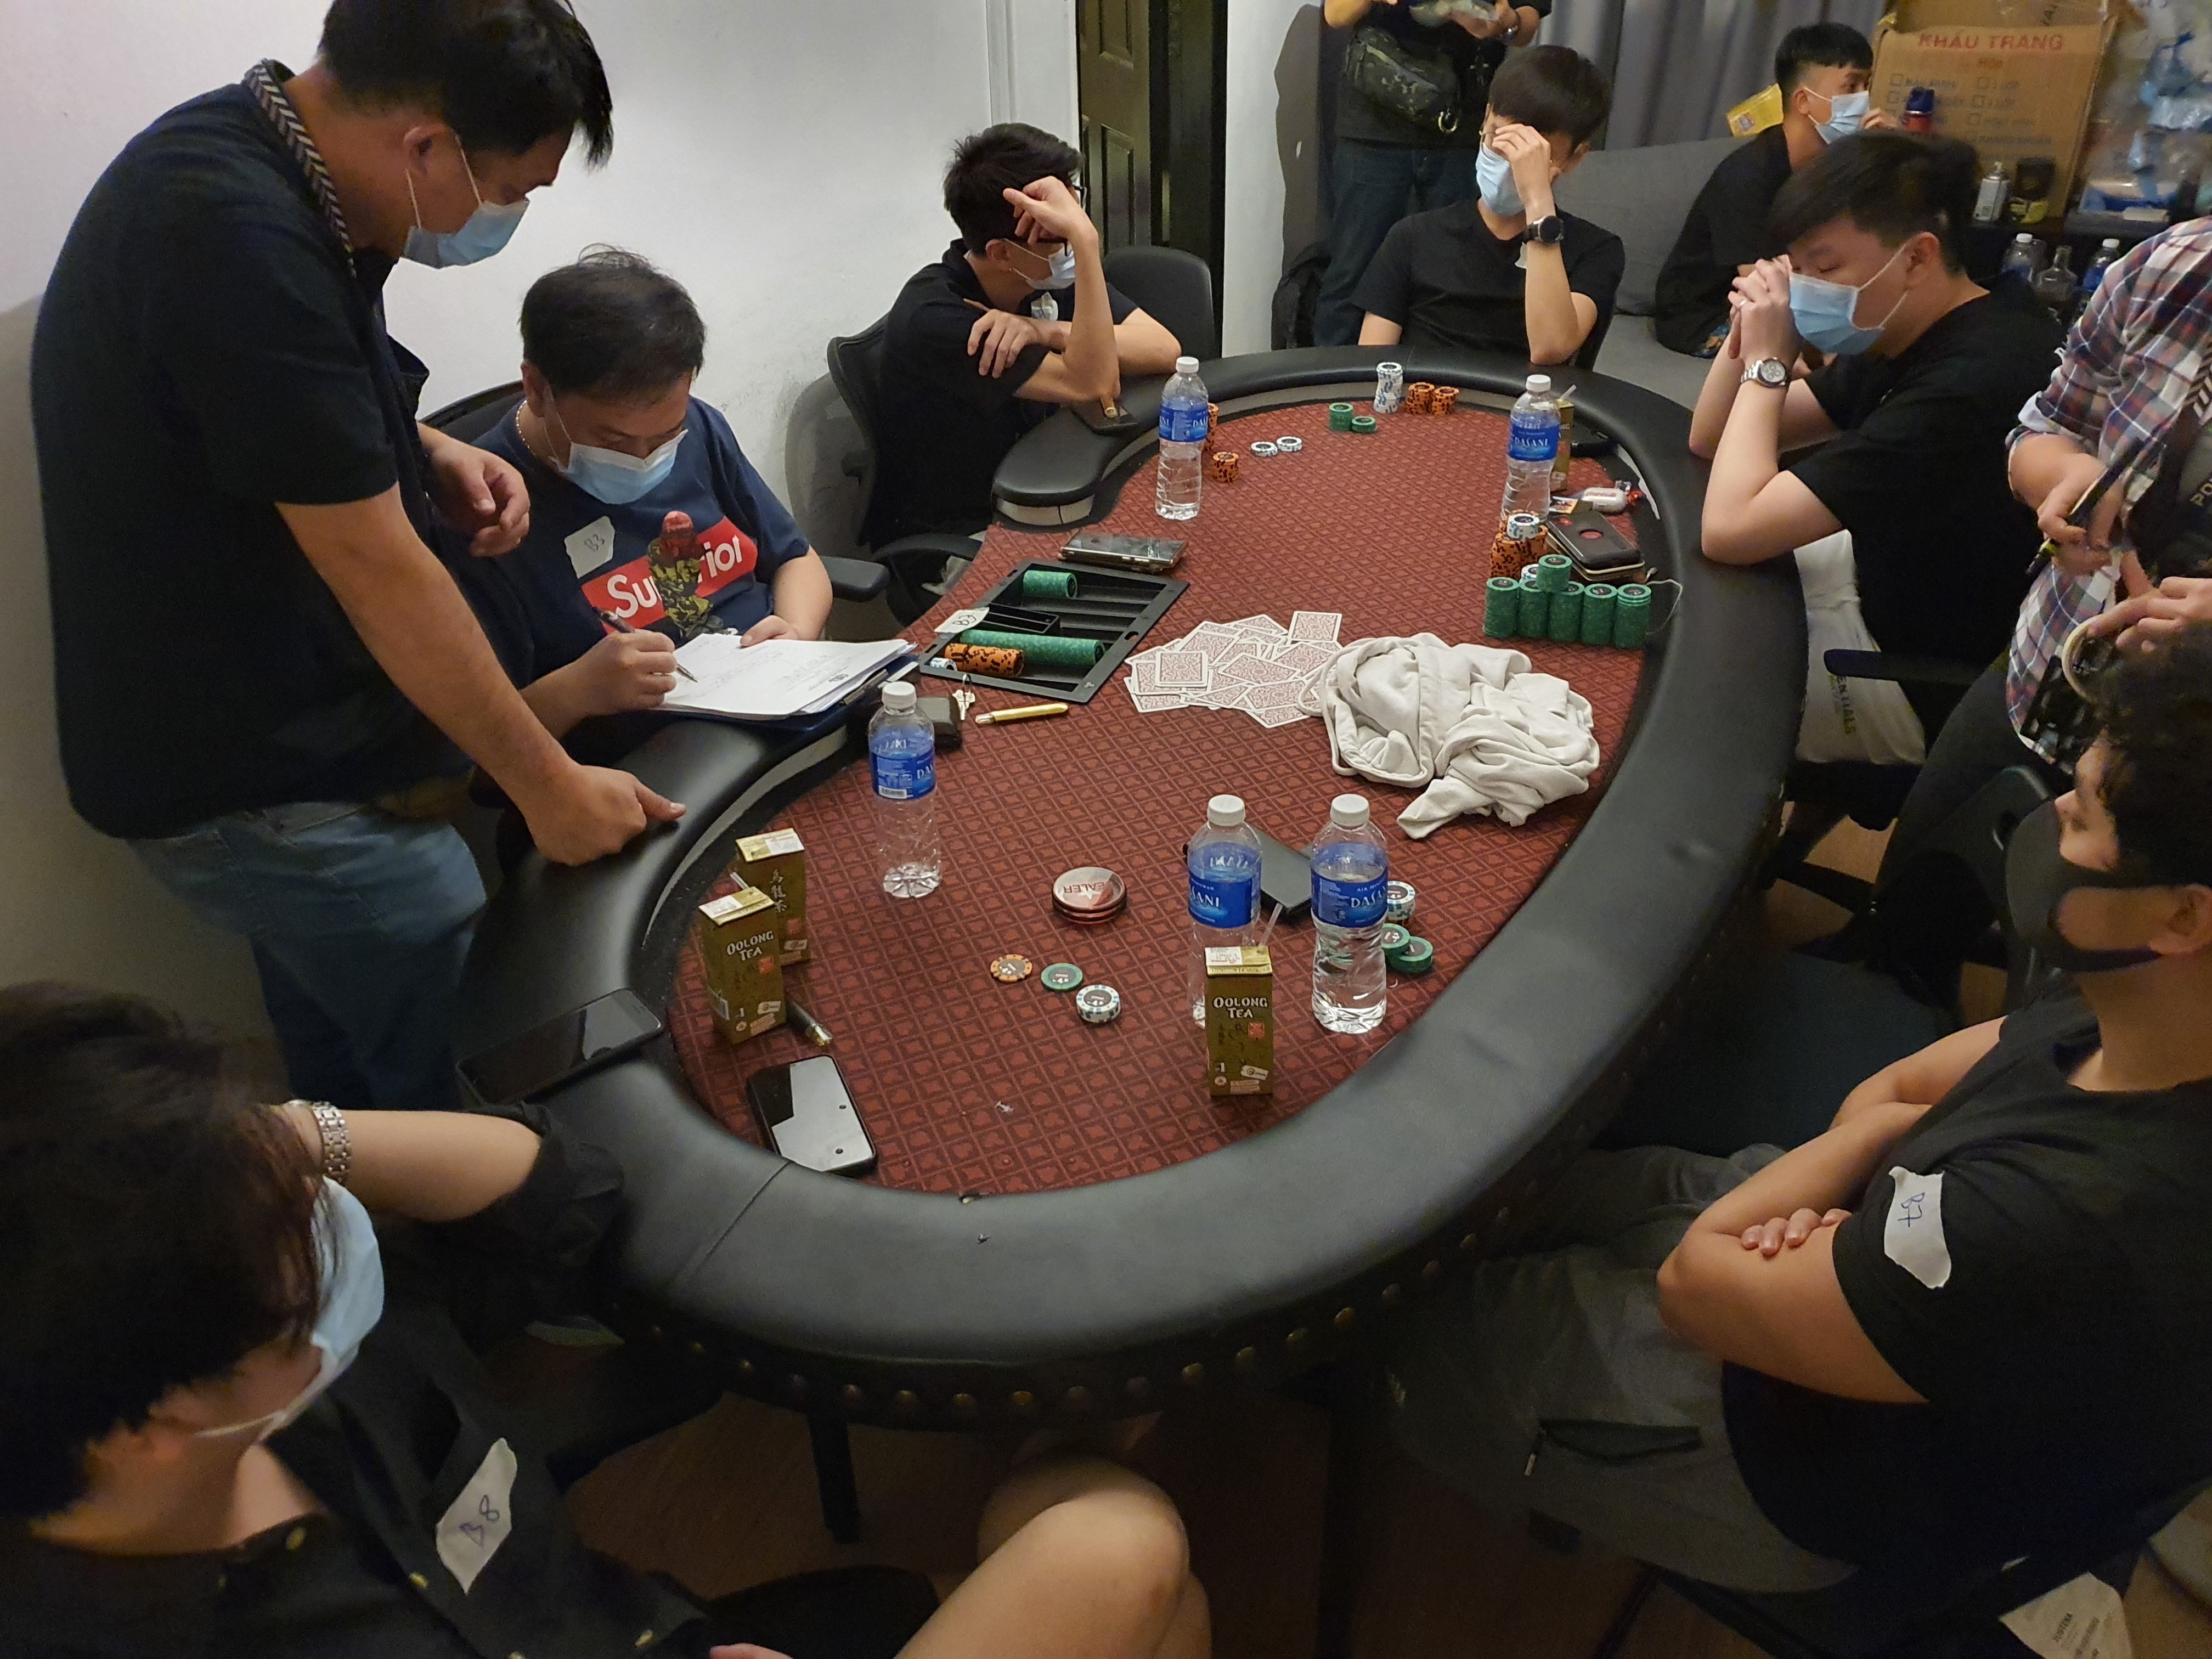 11 Persons Arrested For Illegal Gambling Offences, Non-Compliance With Safe Distancing Measures And Other Offences Under The Misuse Of Drugs Act